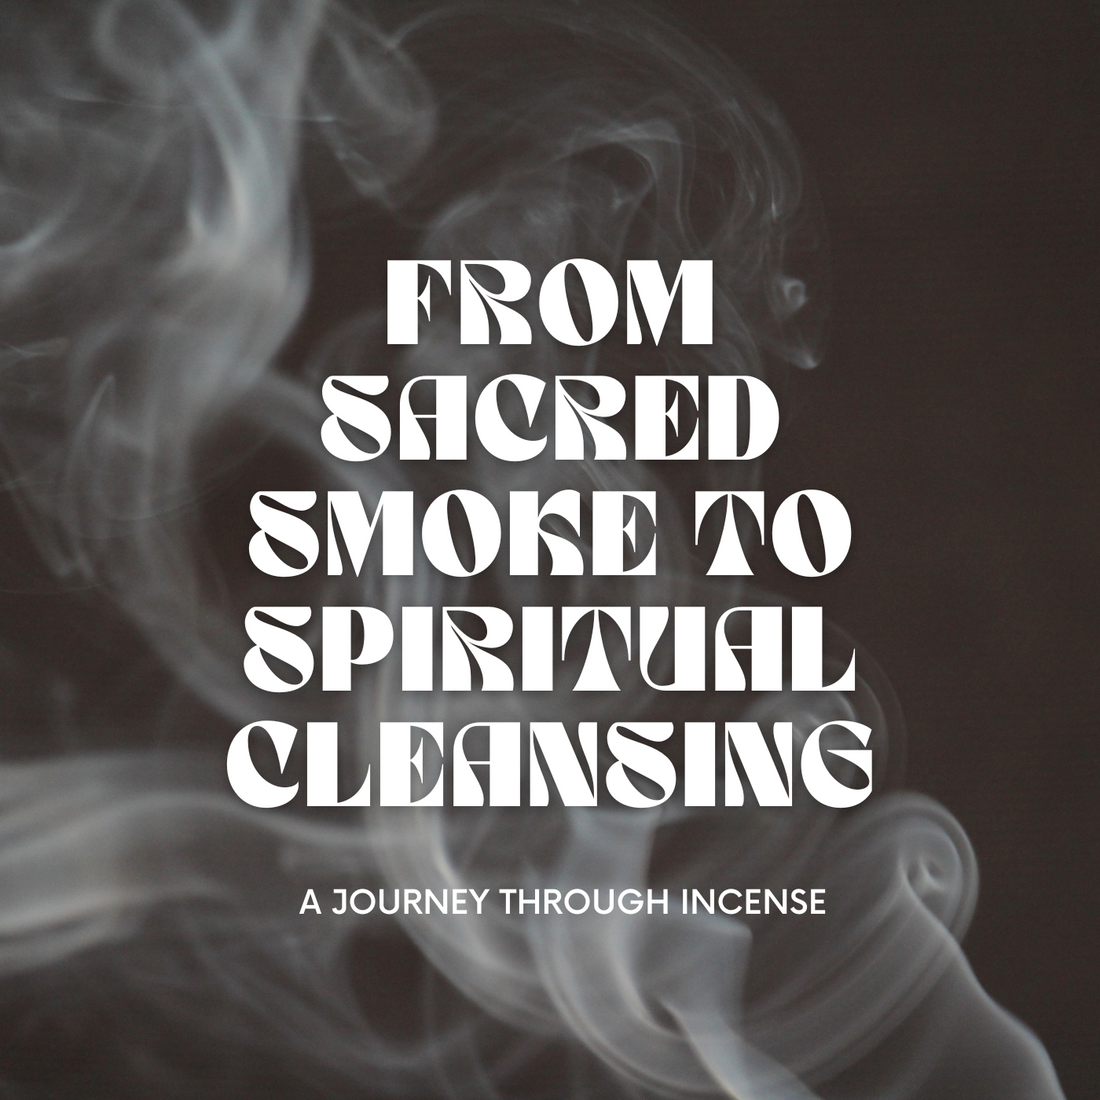 From Sacred Smoke to Spiritual Cleansing: A Journey Through Incense